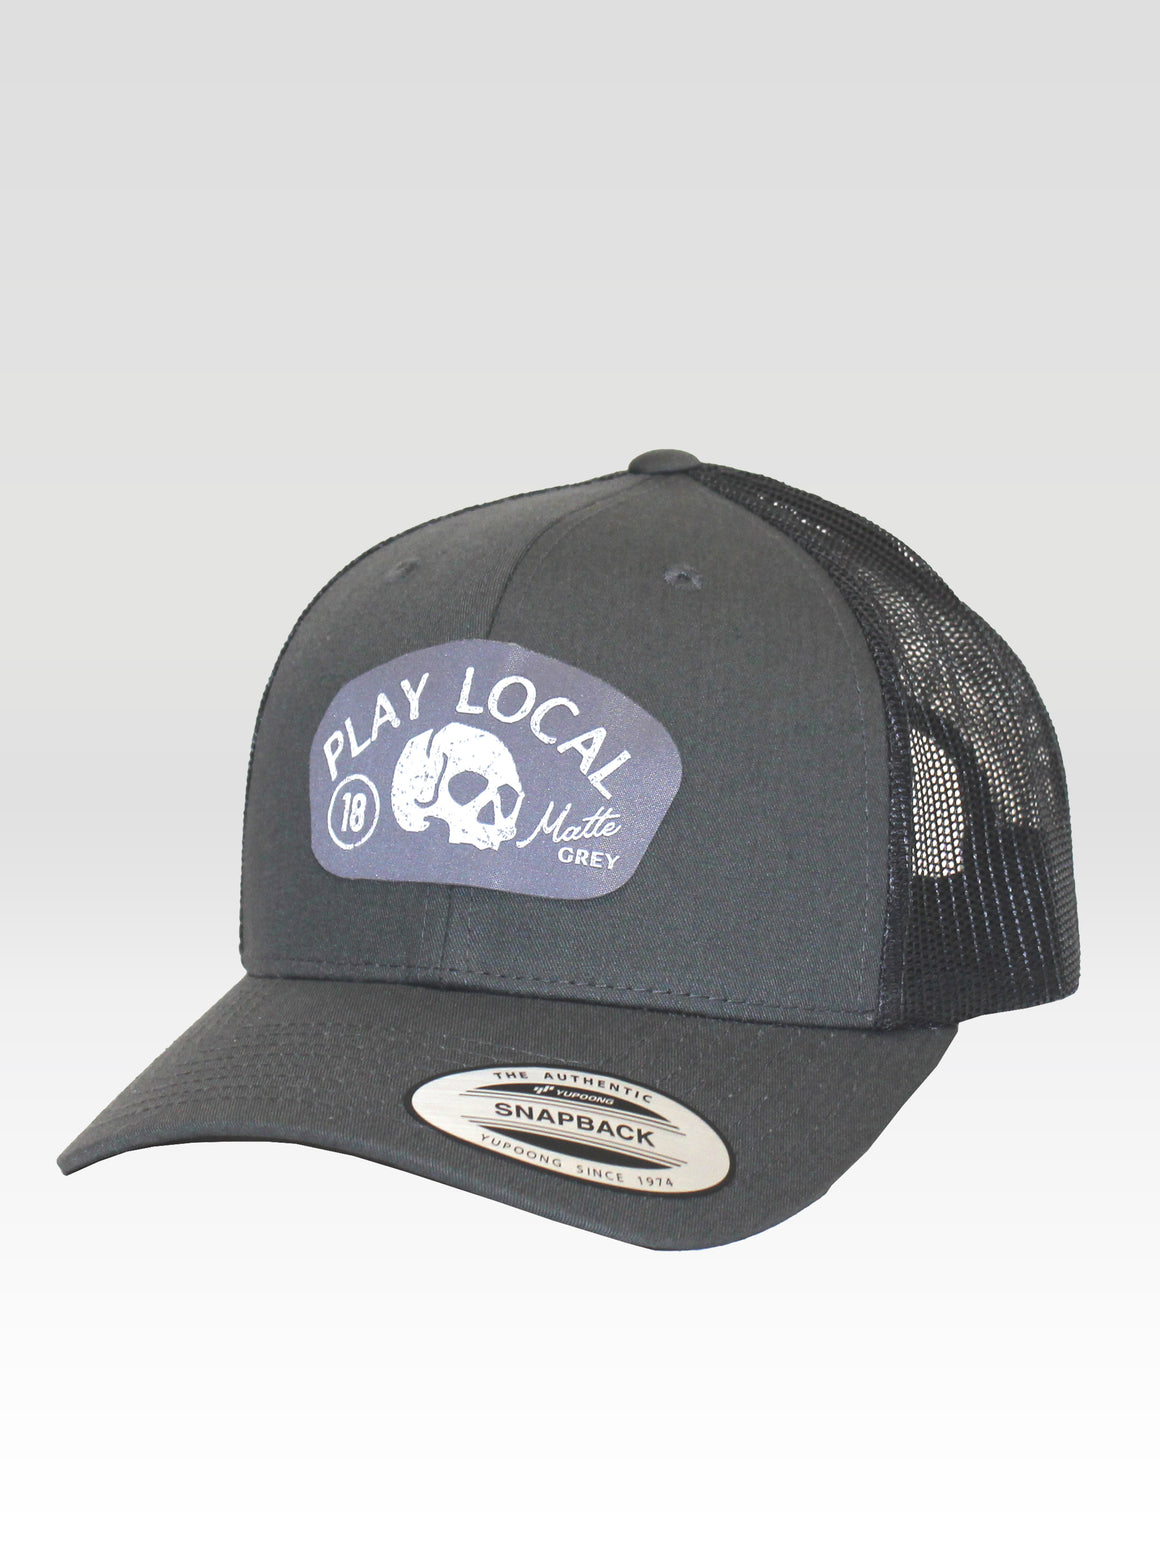 Play Local Trucker - Charcoal